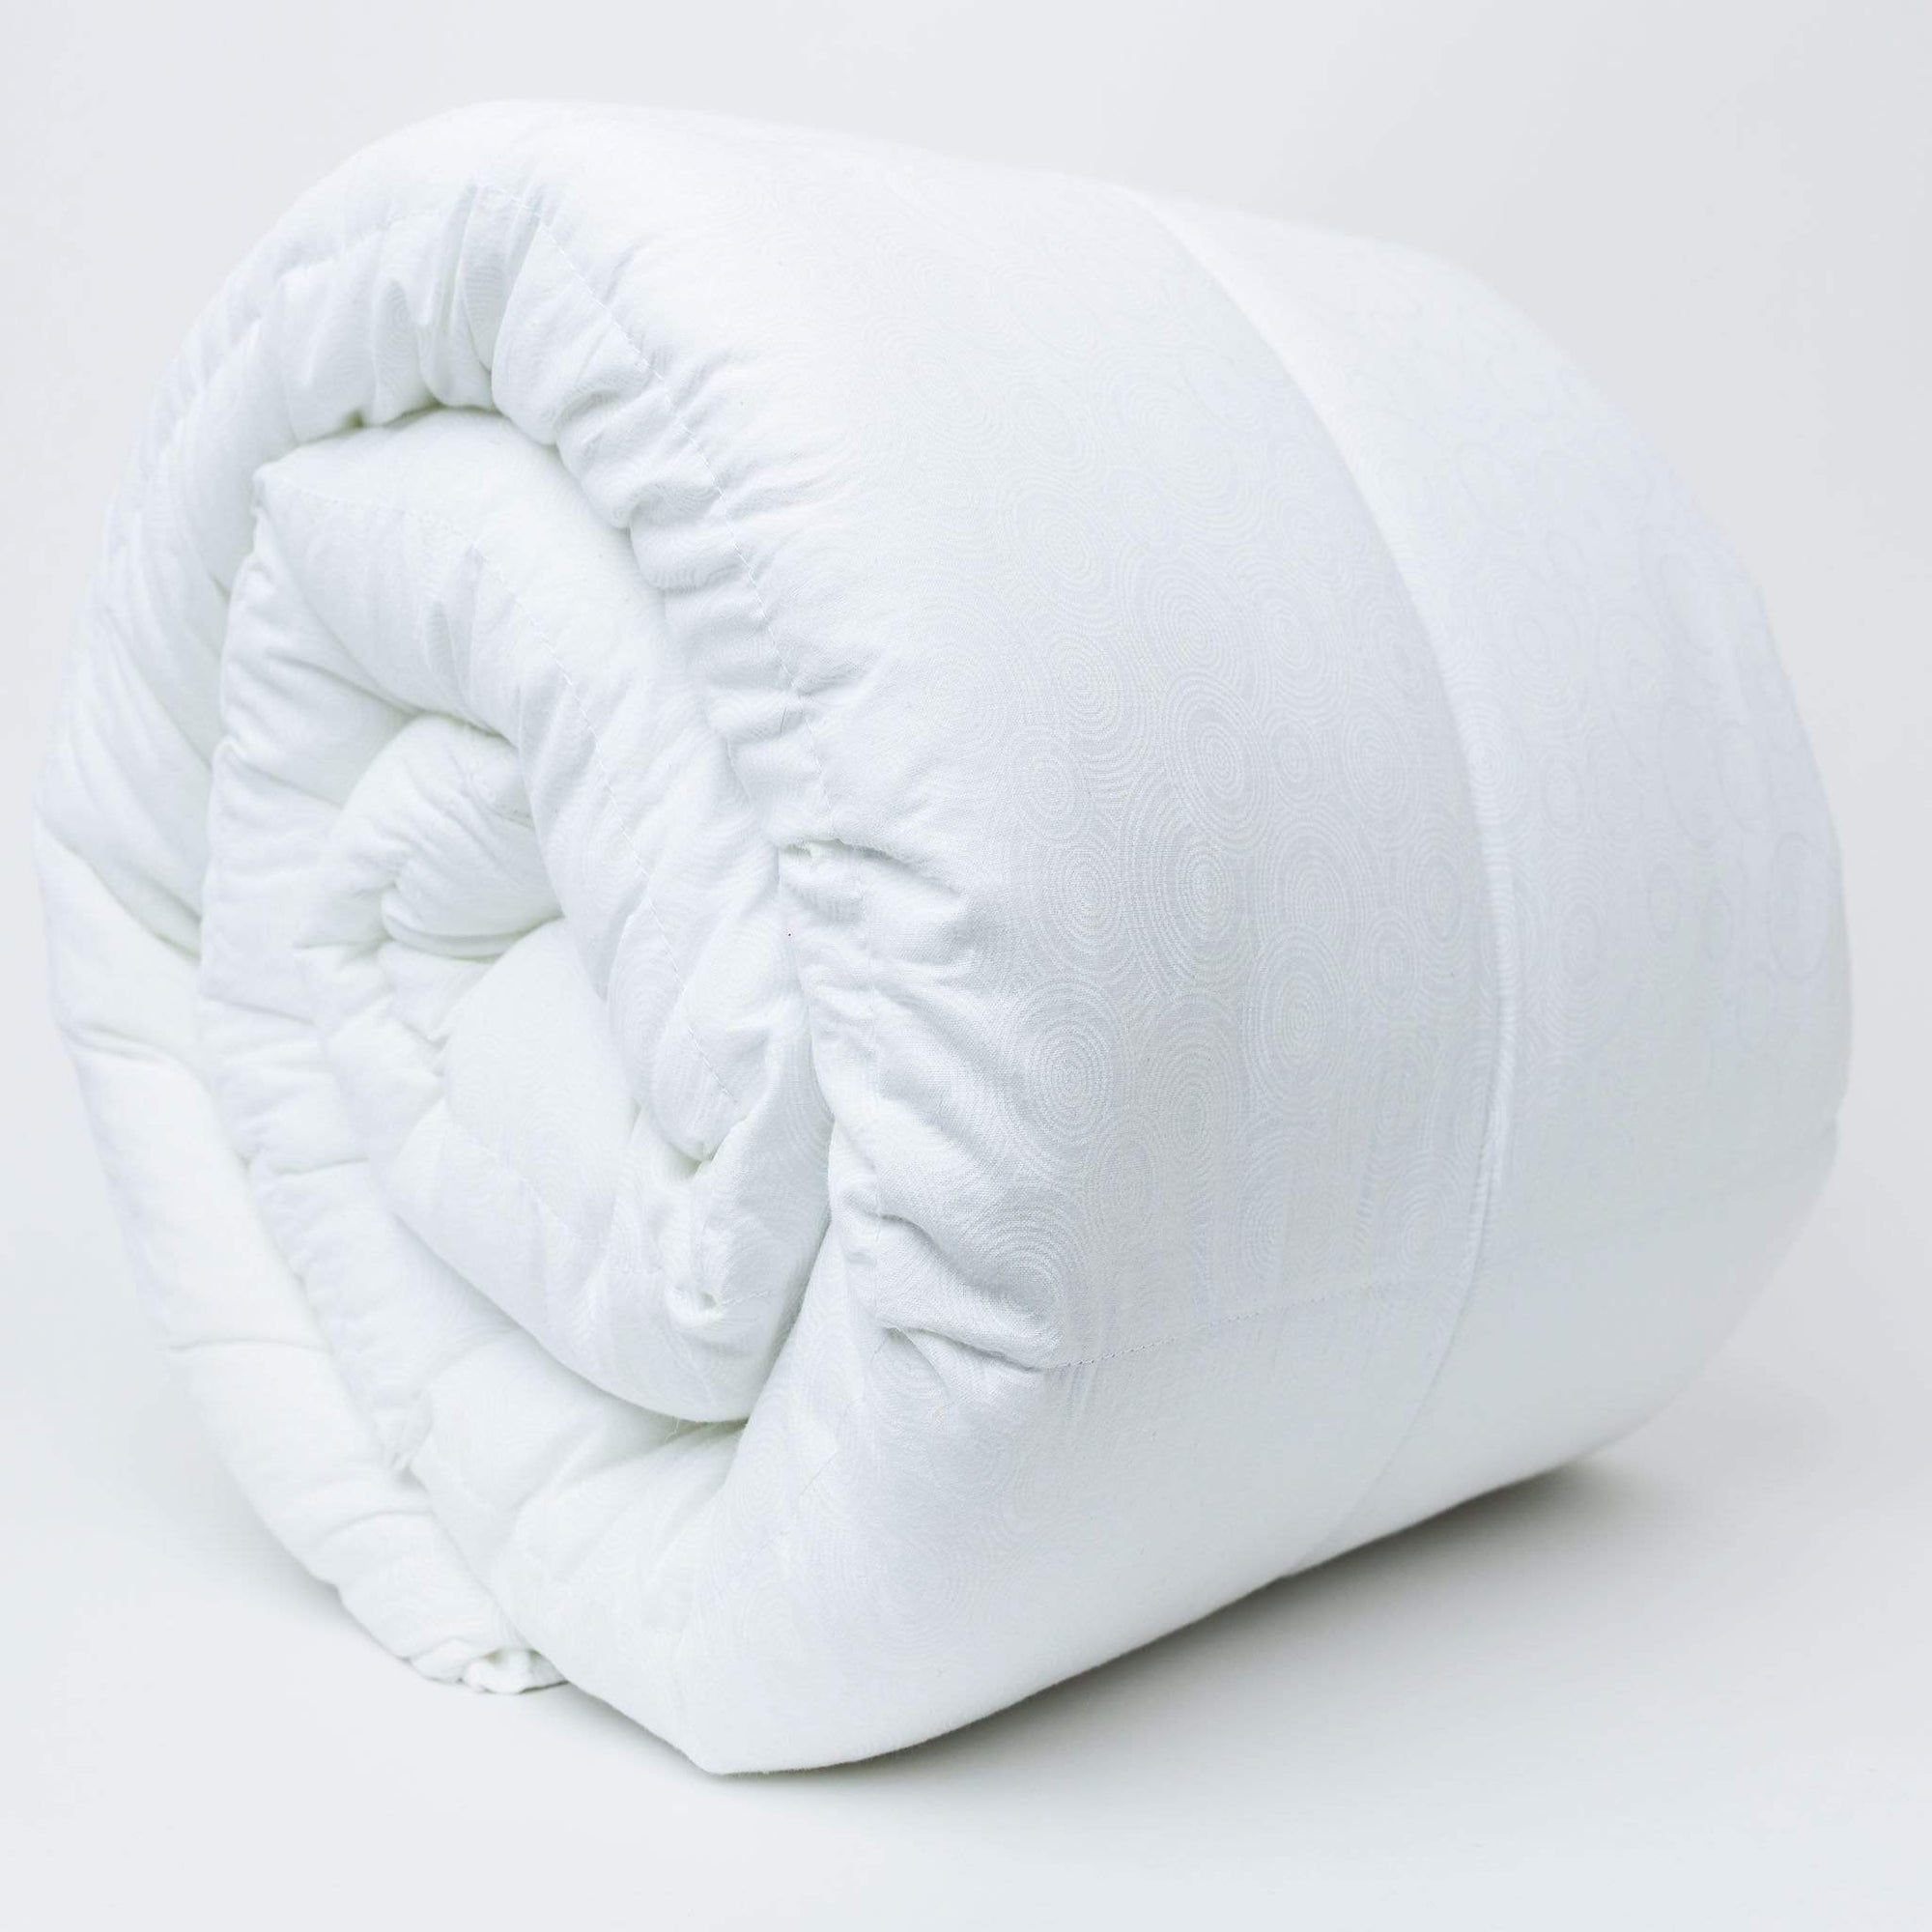 BLANCA WHITE WEIGHTED BLANKET